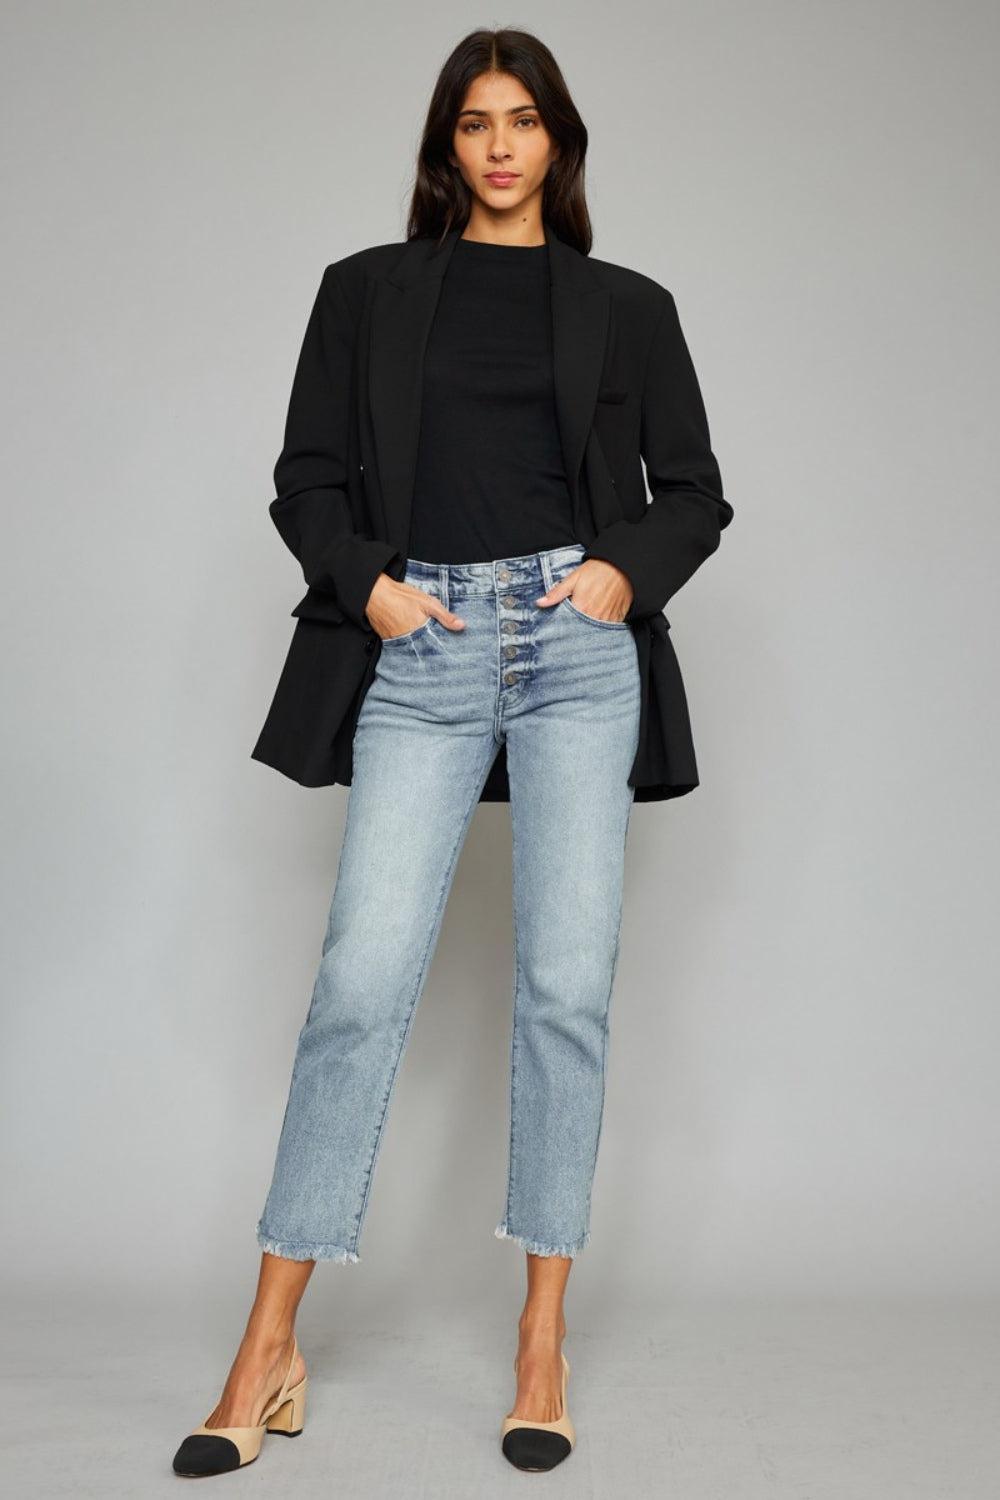 a woman wearing a black jacket and jeans